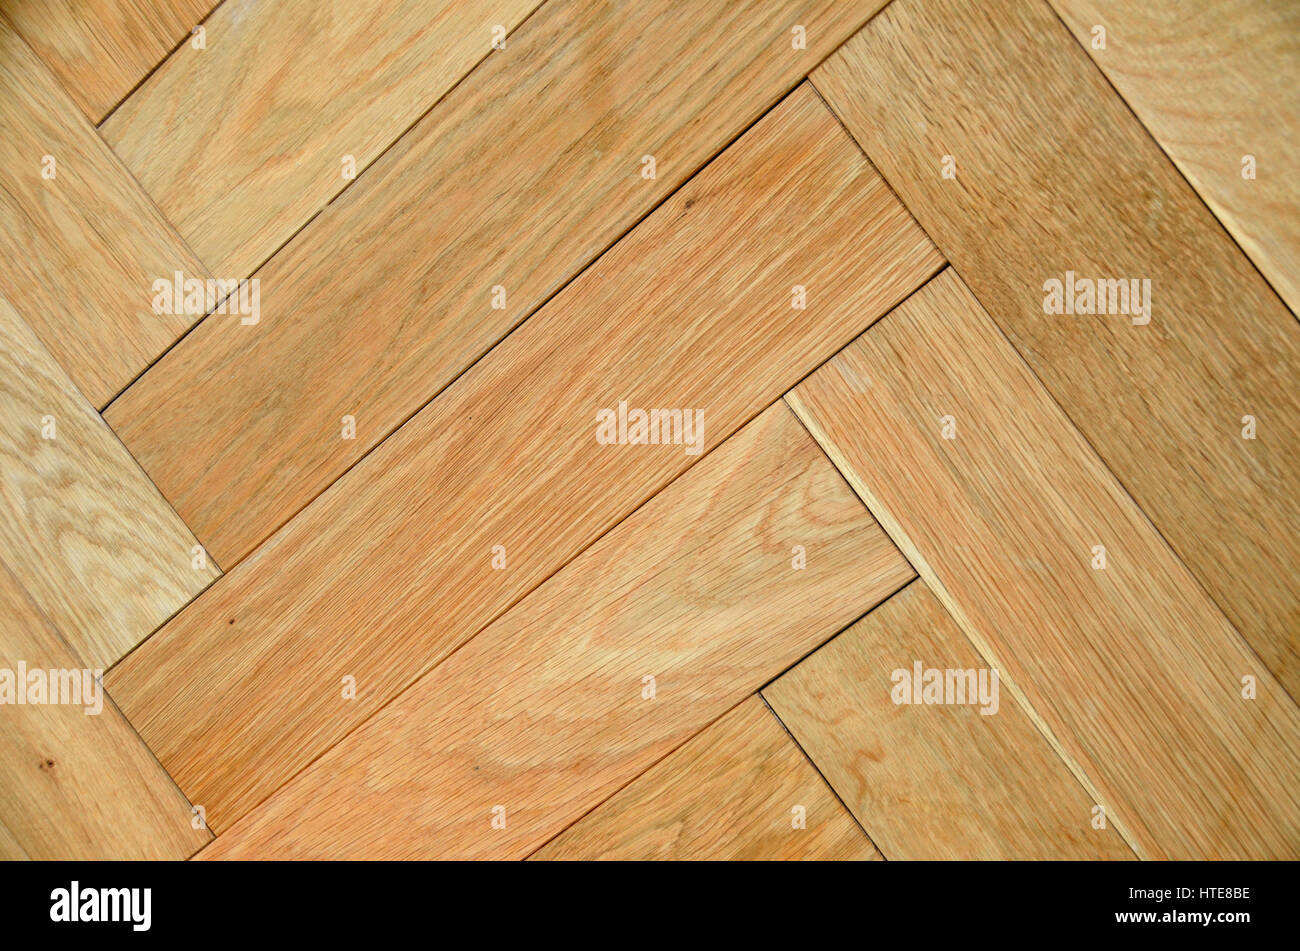 Tiled wooden flooring close-up. Stock Photo